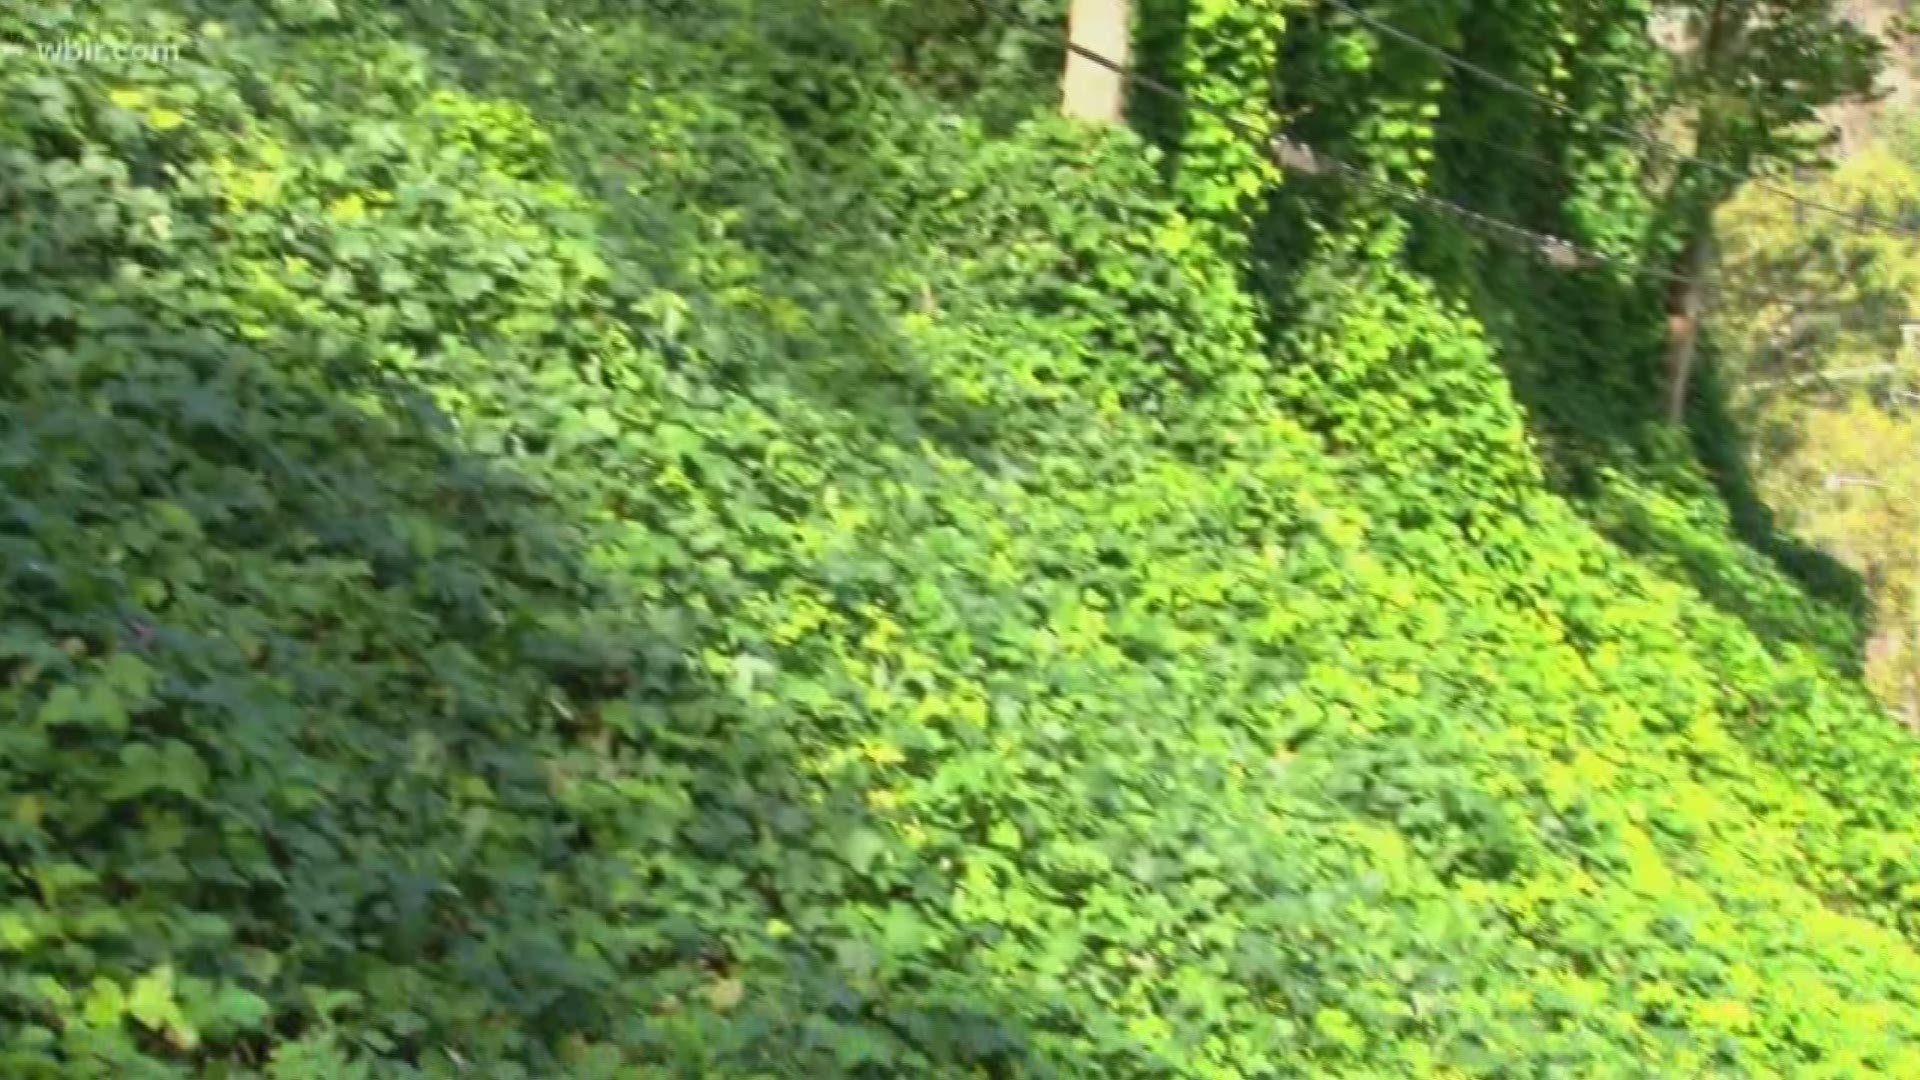 An invasive plant is taking over parts of Gatlinburg two years after the Sevier County wildfires killed native species on the mountainside.